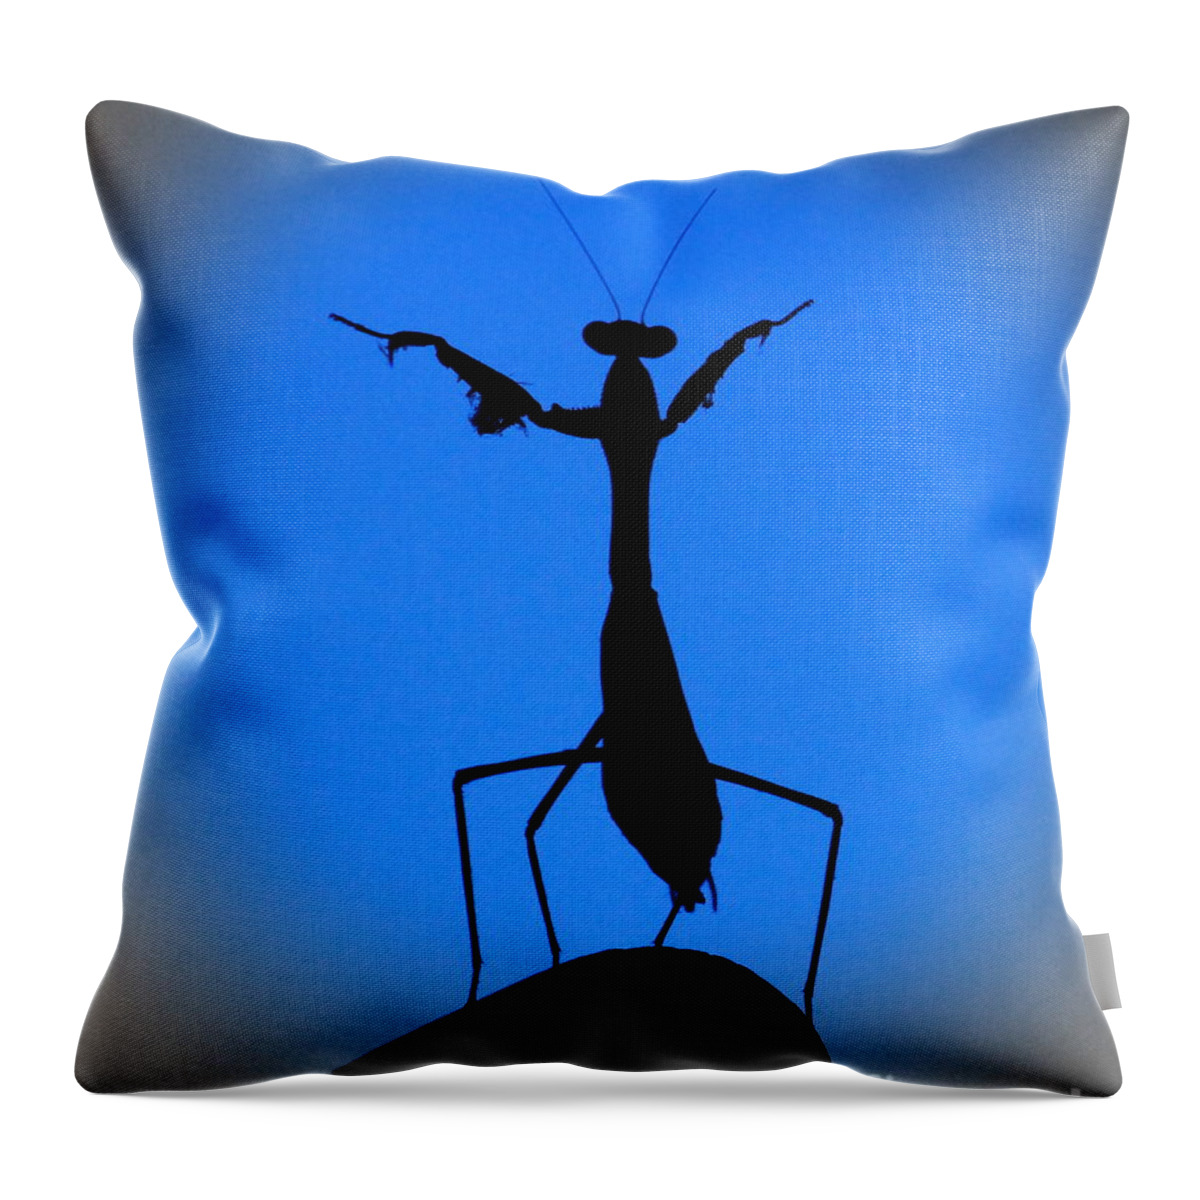 Conductor Throw Pillow featuring the photograph The Conductor by Patrick Witz